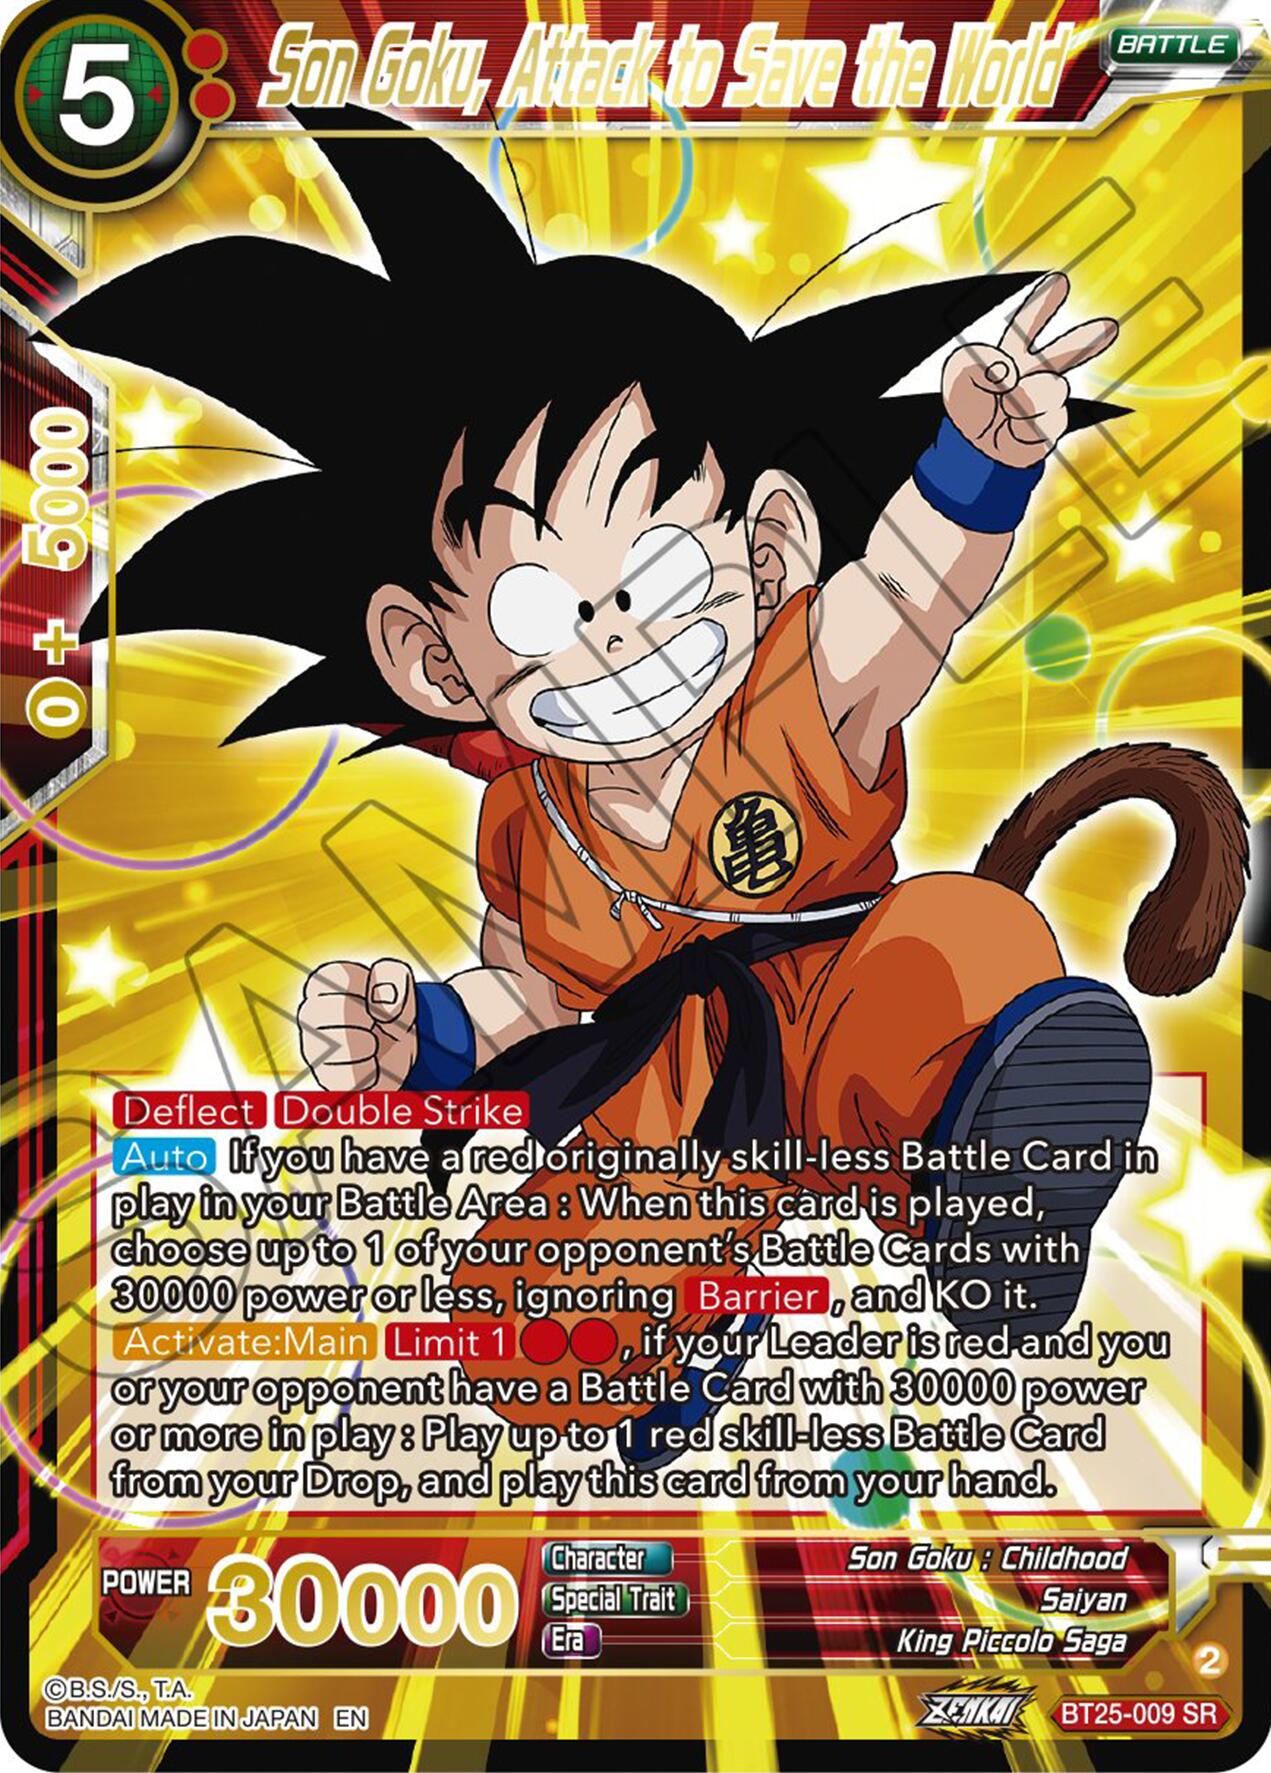 Son Goku, Attack to Save the World (BT25-009) [Legend of the Dragon Balls] | Rock City Comics